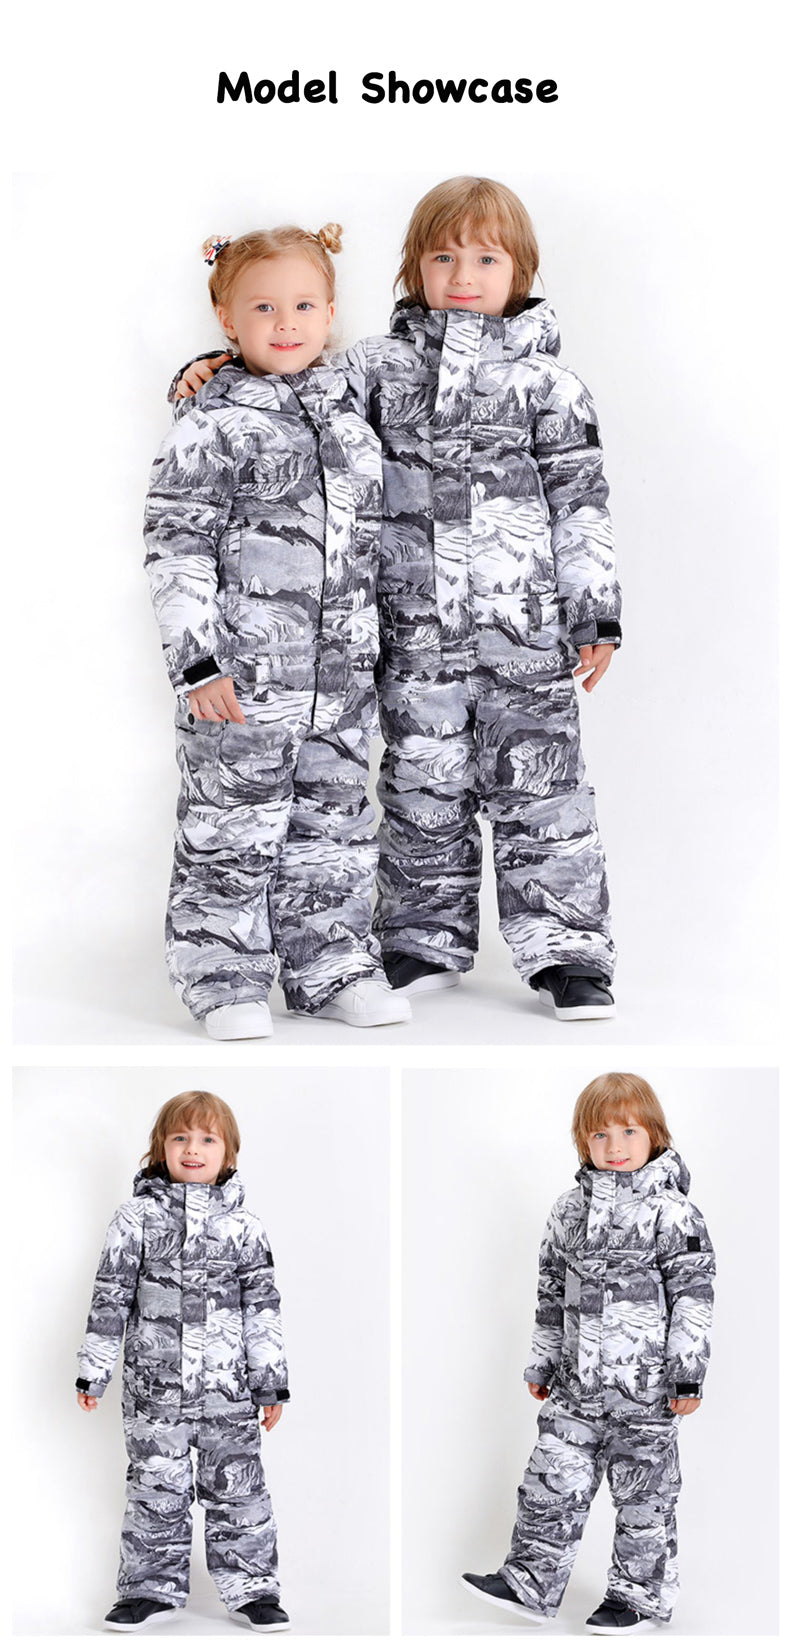 Kids Unisex Waterproof Colorful Winter Outdoor Ski Suit One Piece Snowsuits For Boy & Girl